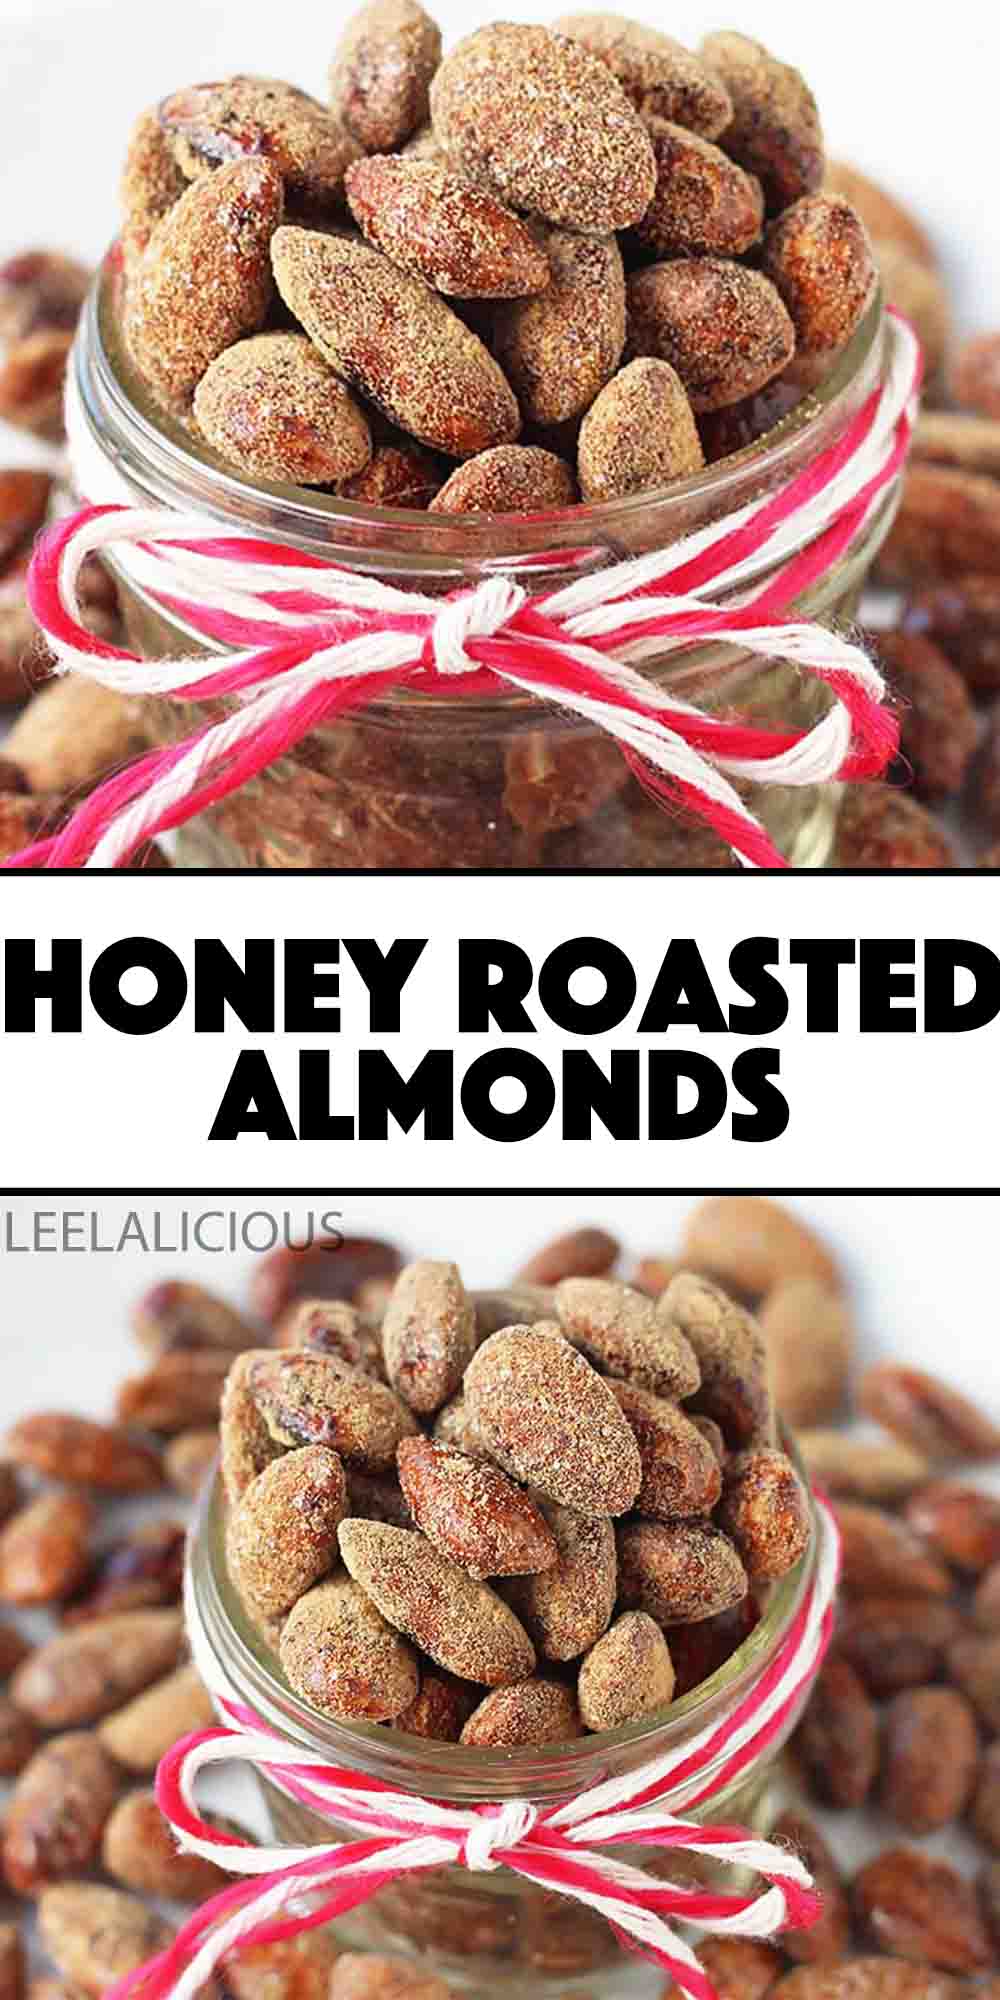 honey roasted almonds in  glass jar with red and white string tied into bow